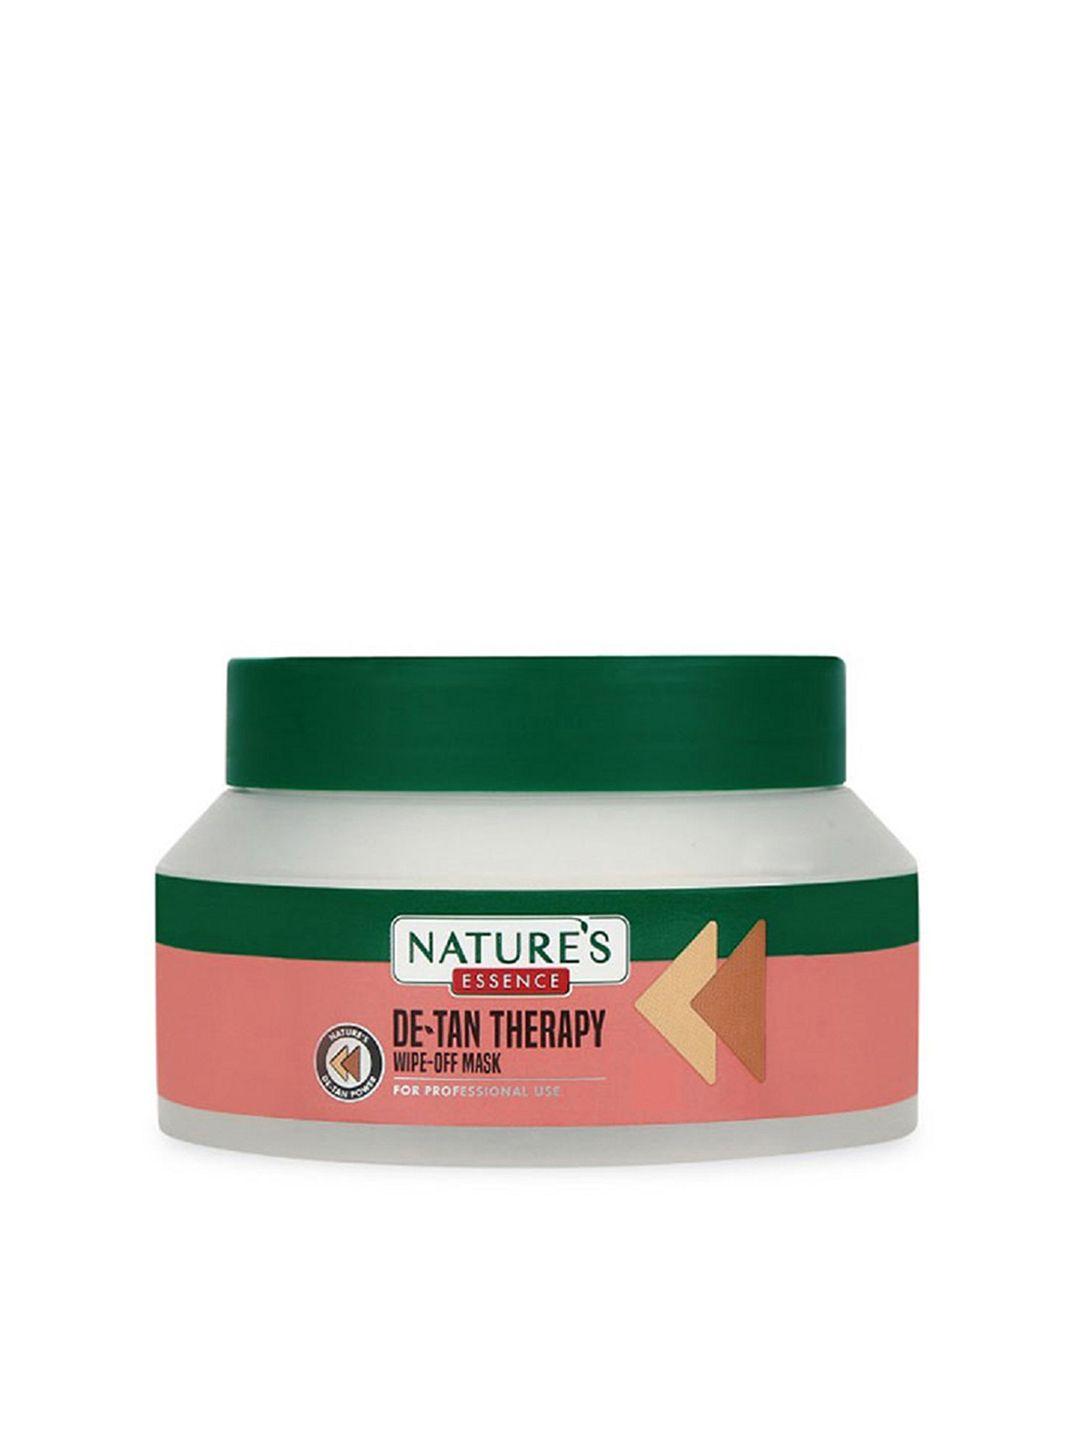 natures essence de-tan therapy wipe-off mask - 200g